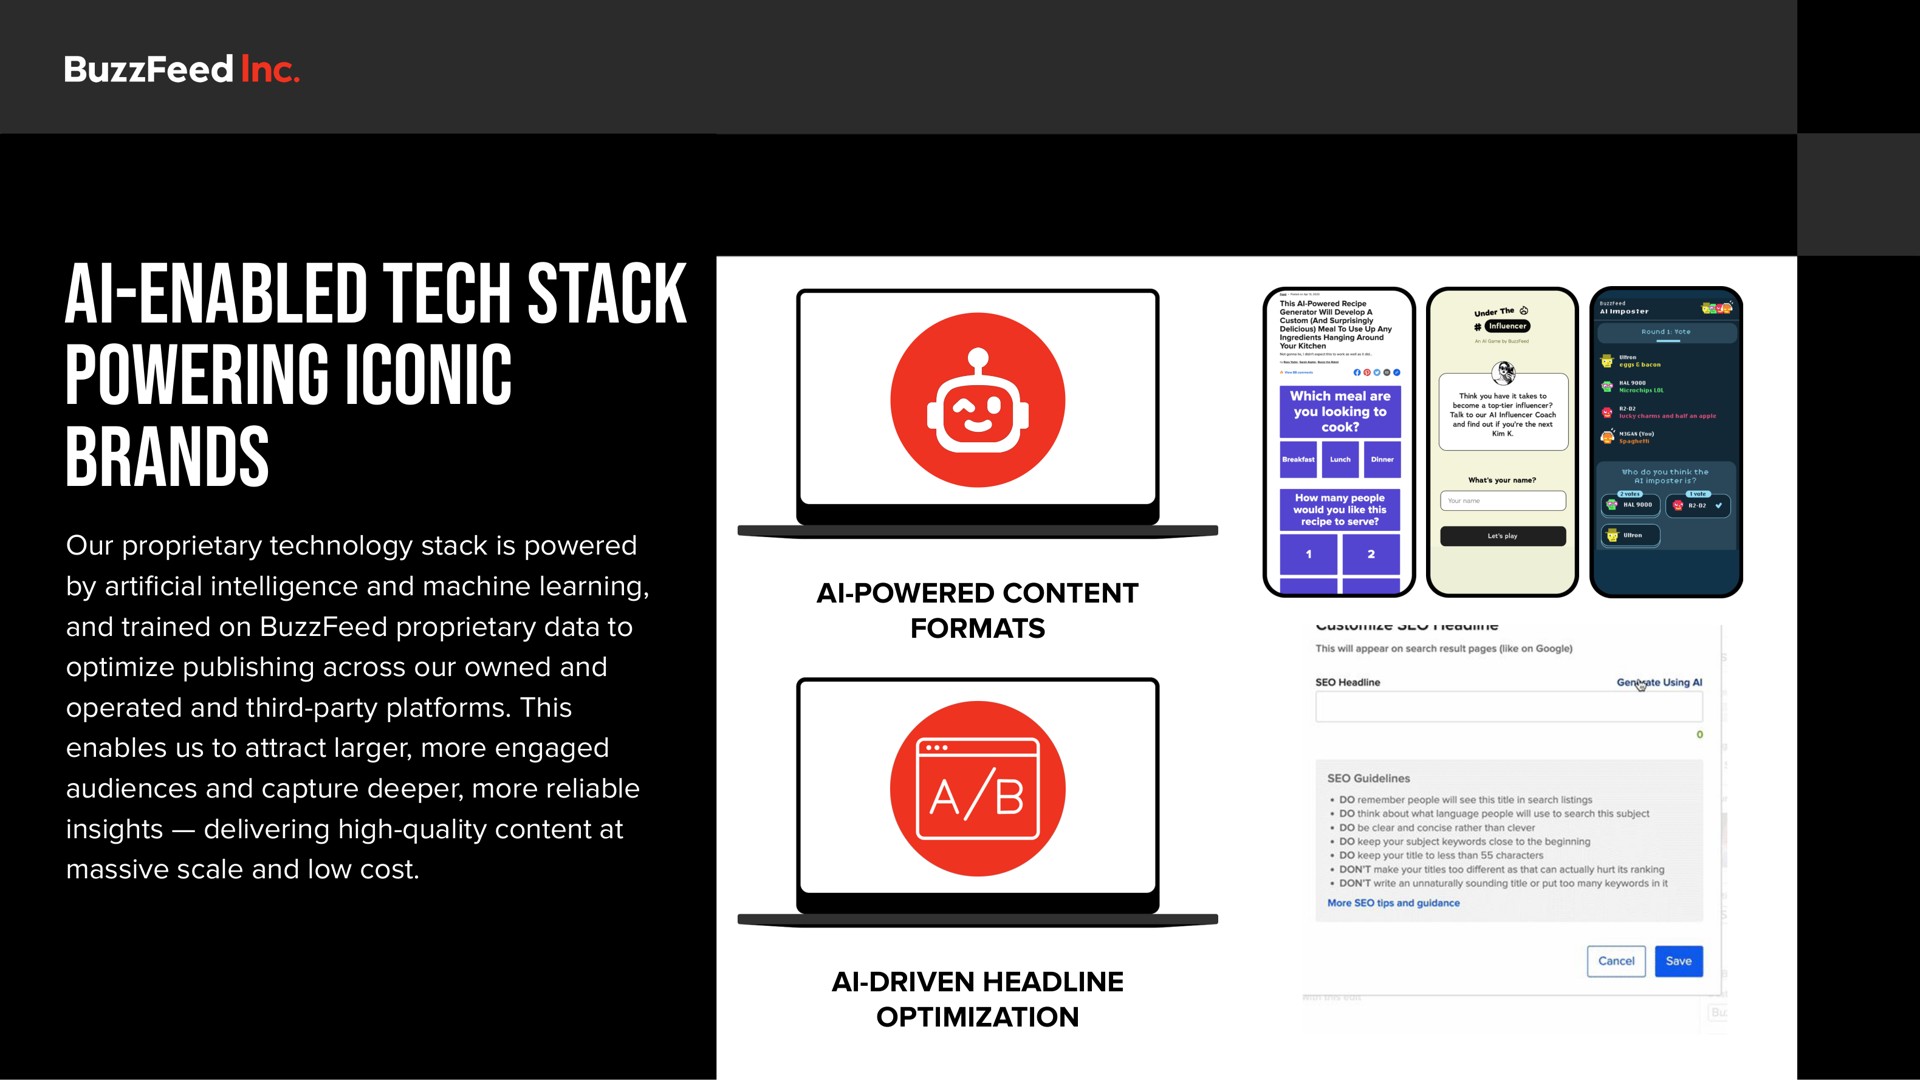 enabled tech stack powering iconic brands | BuzzFeed